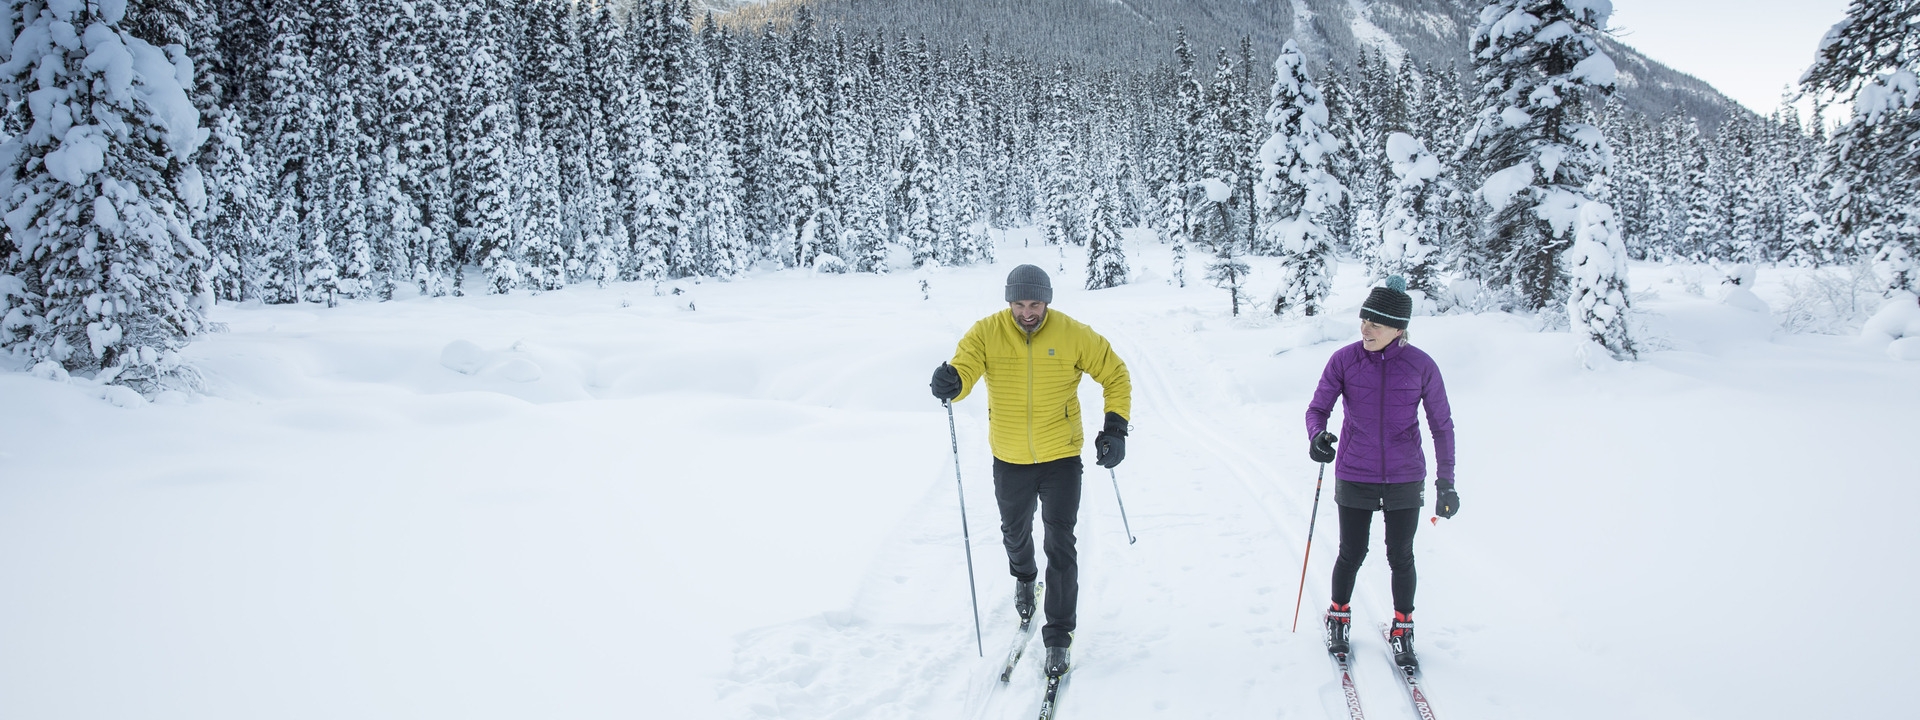 Two people cross country skiing